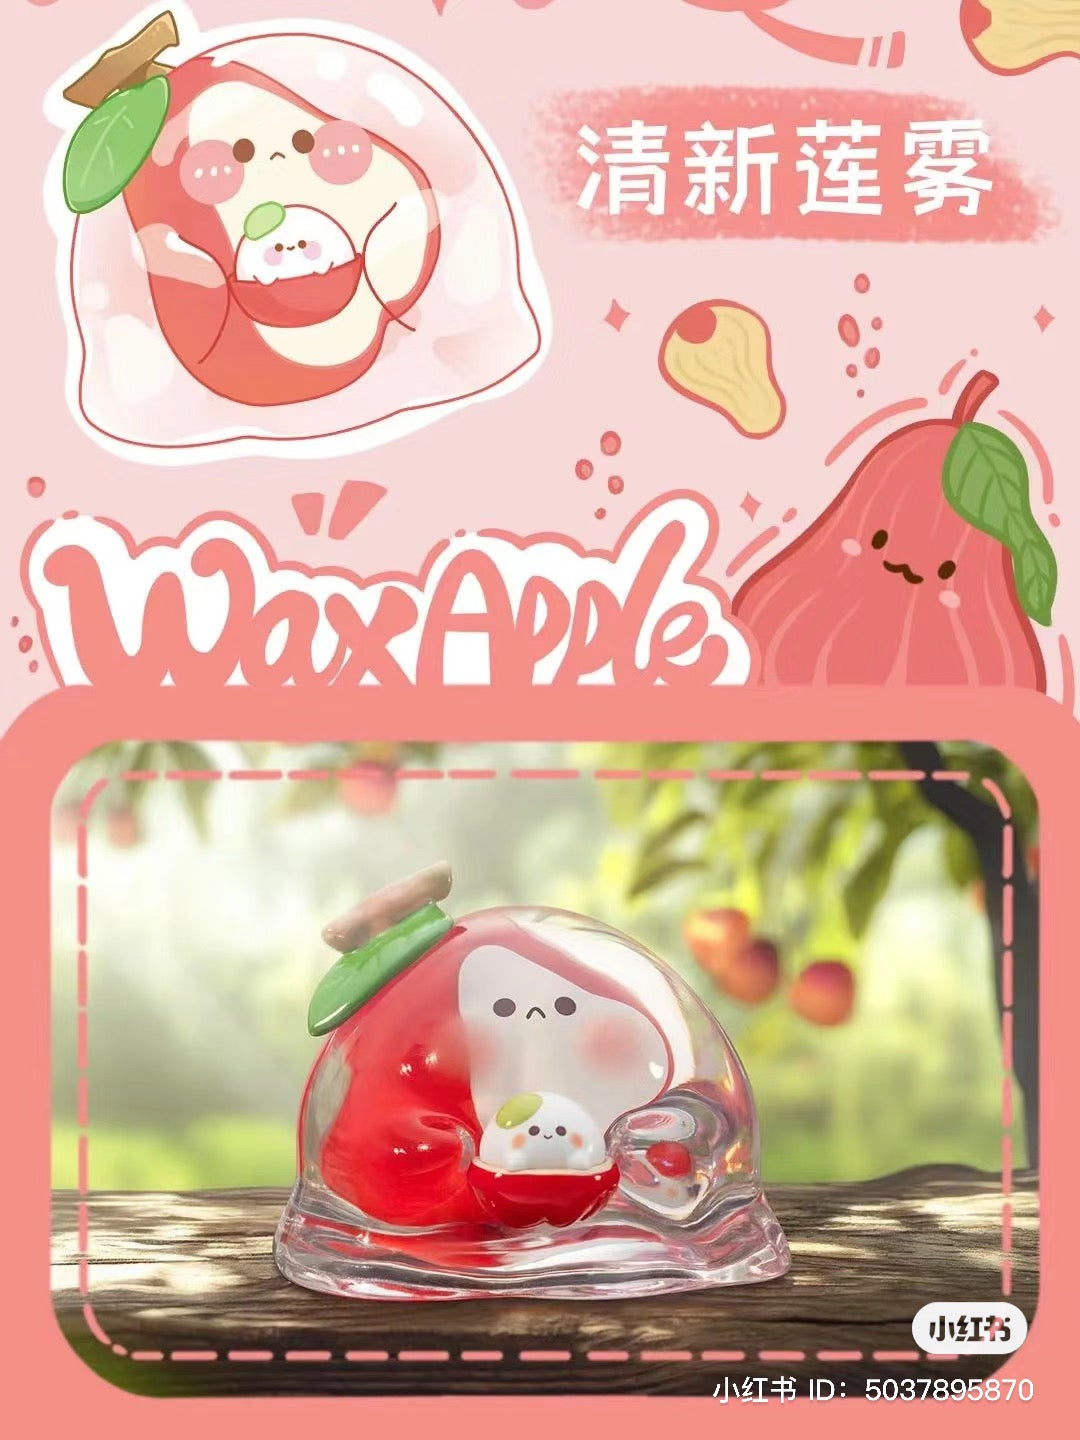 Alt text: Glass figurines from Bubble Eggs Colorful Fruit Blind Box Series, featuring a red apple with a white face.